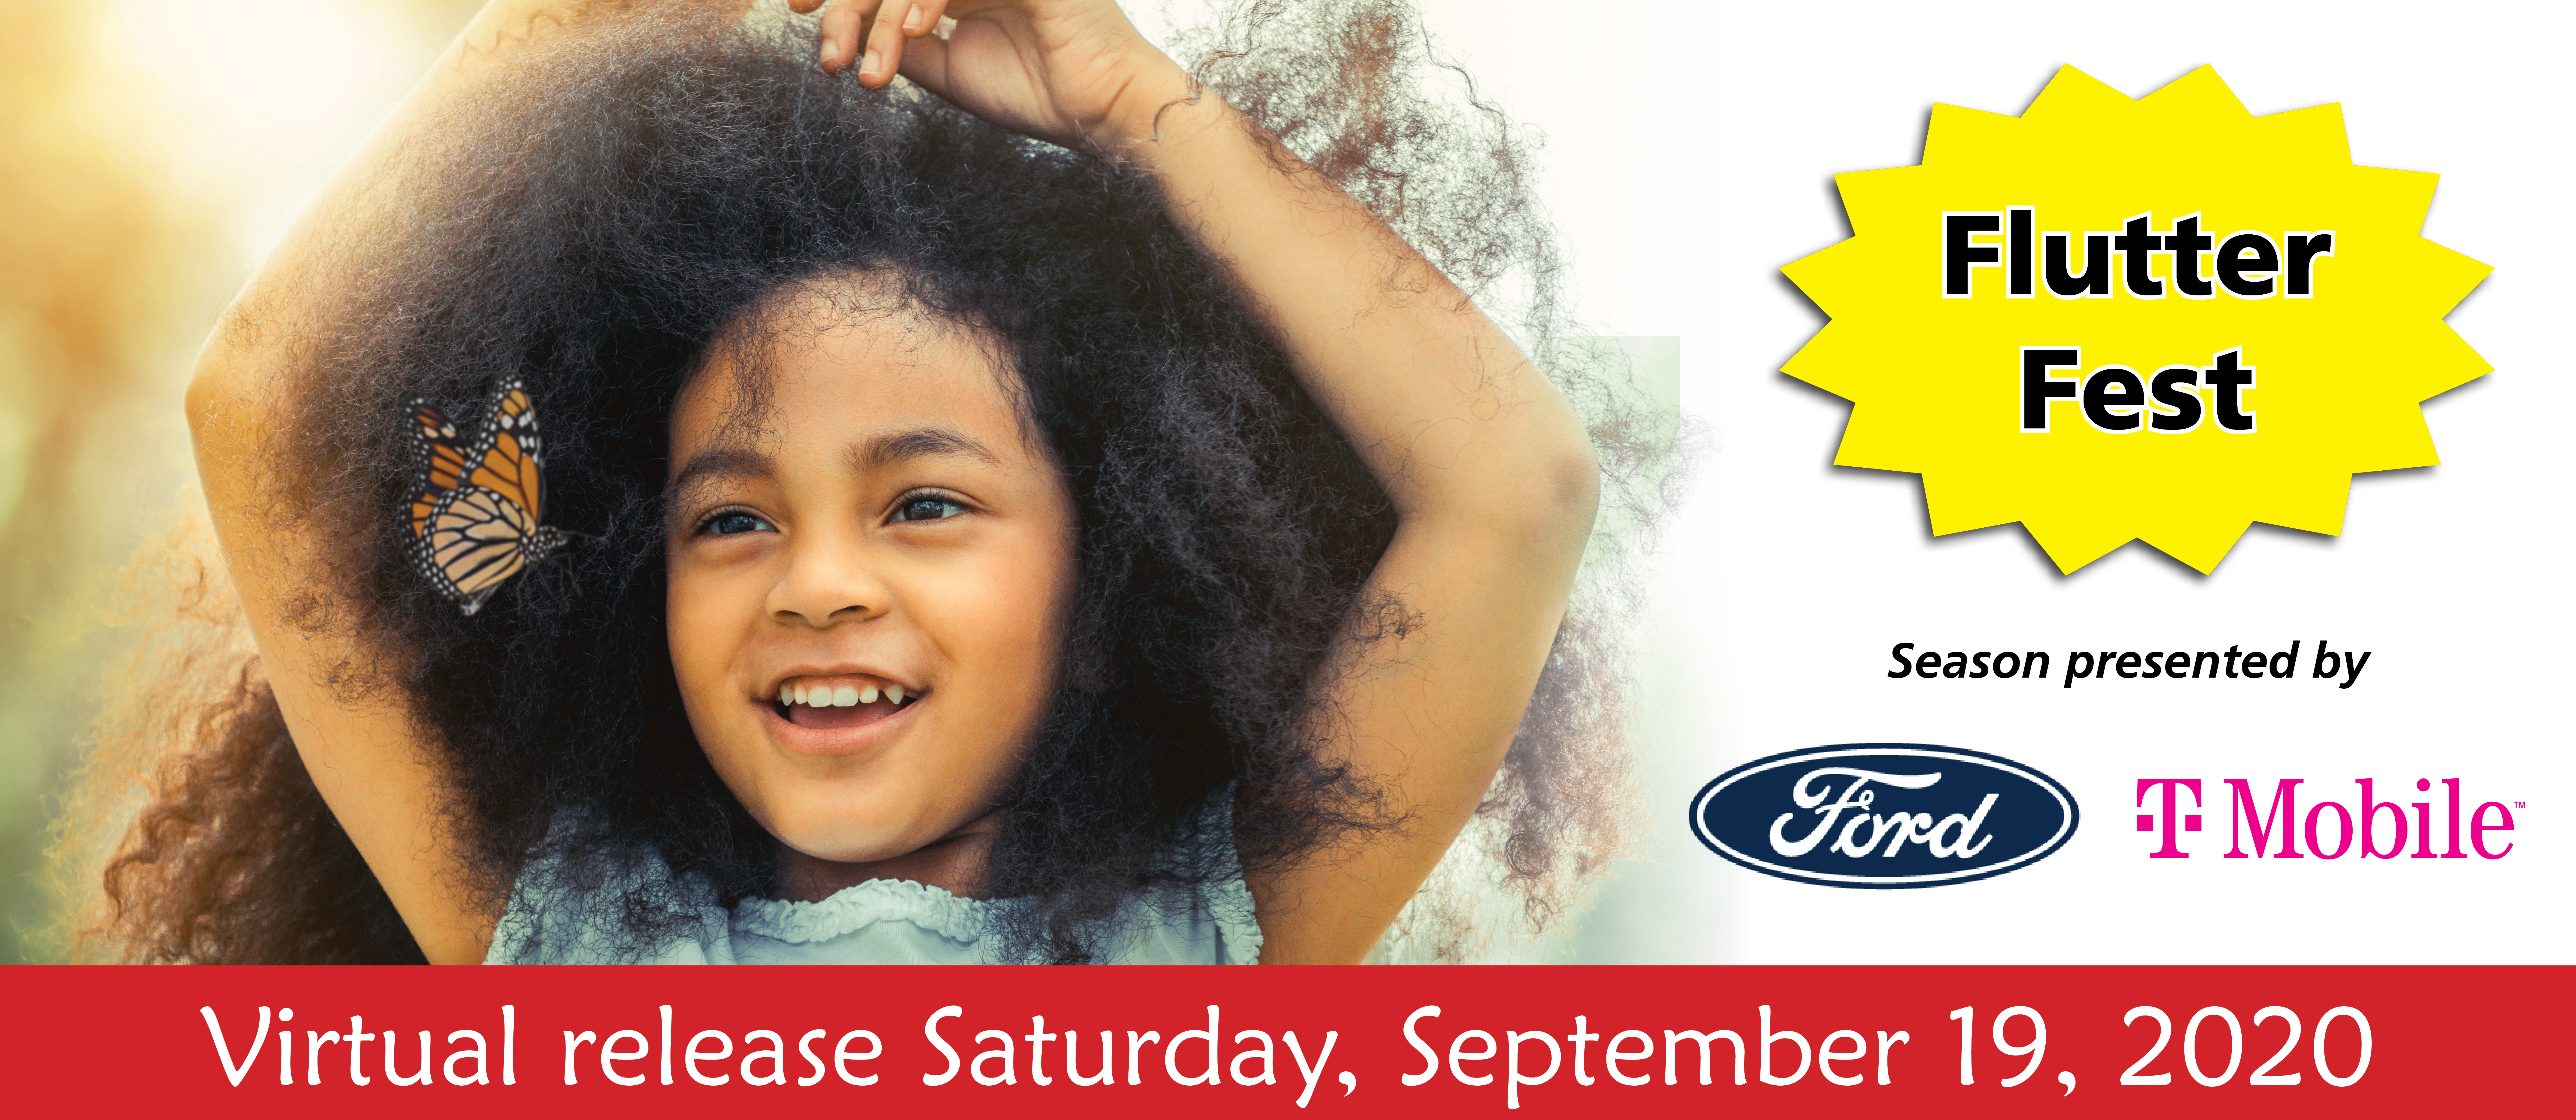 banner - photo of young girl l/side of banner, with butterfly in her hair; Flutter Fest highlighted in yellow star; Season presented by Ford log, T-Mobile logo, Virtual release Saturday, September 19, 2020 in red box